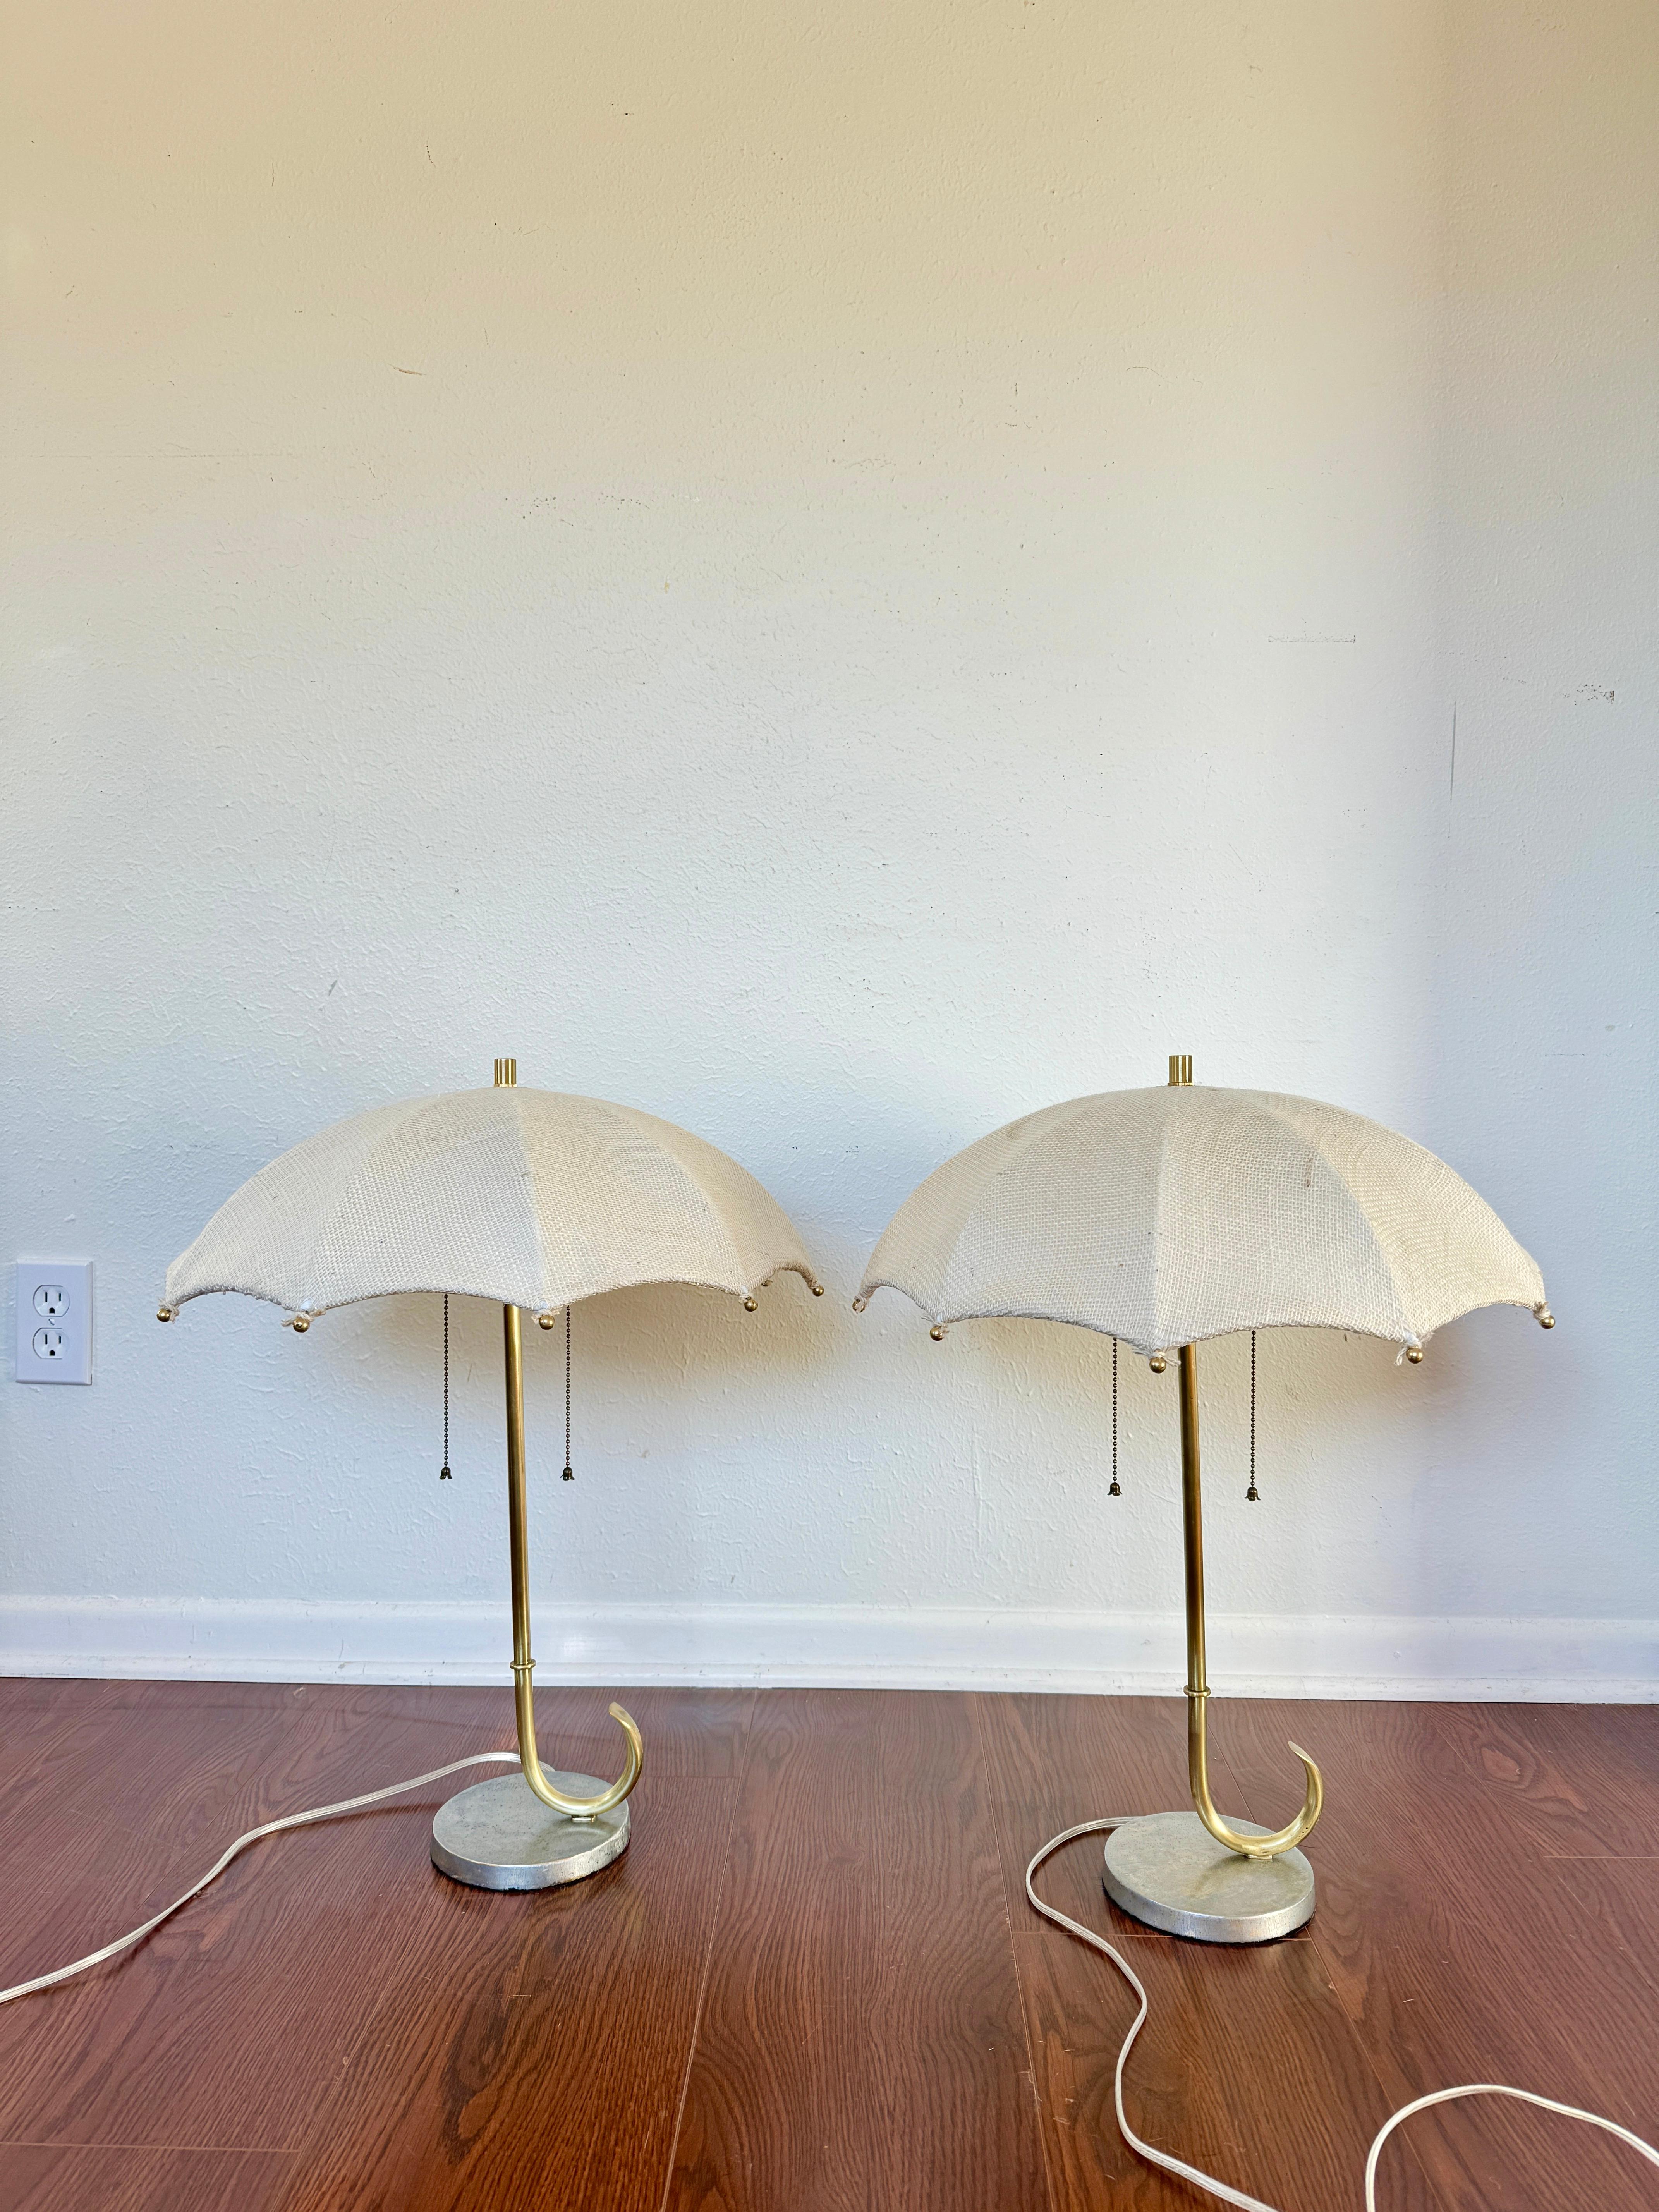 Pair of umbrella table lamps by Gilbert Rohde for Mutual Sunset lamp co 1930s For Sale 12